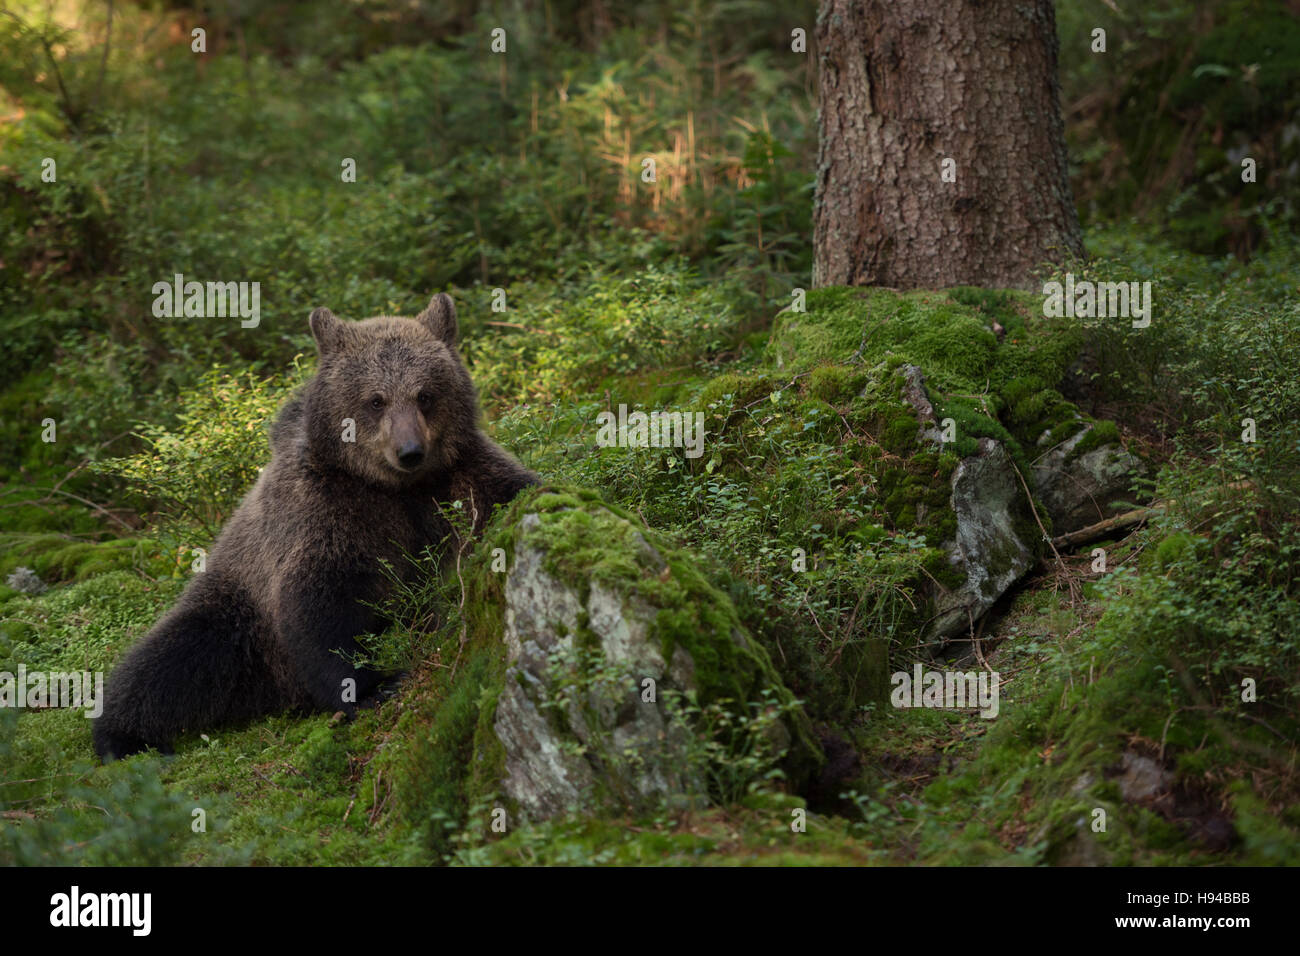 European Brown Bear / Braunbaer ( Ursus arctos ), young animal, playful cub, sitting in the undergrowth of a forest, cute. Stock Photo